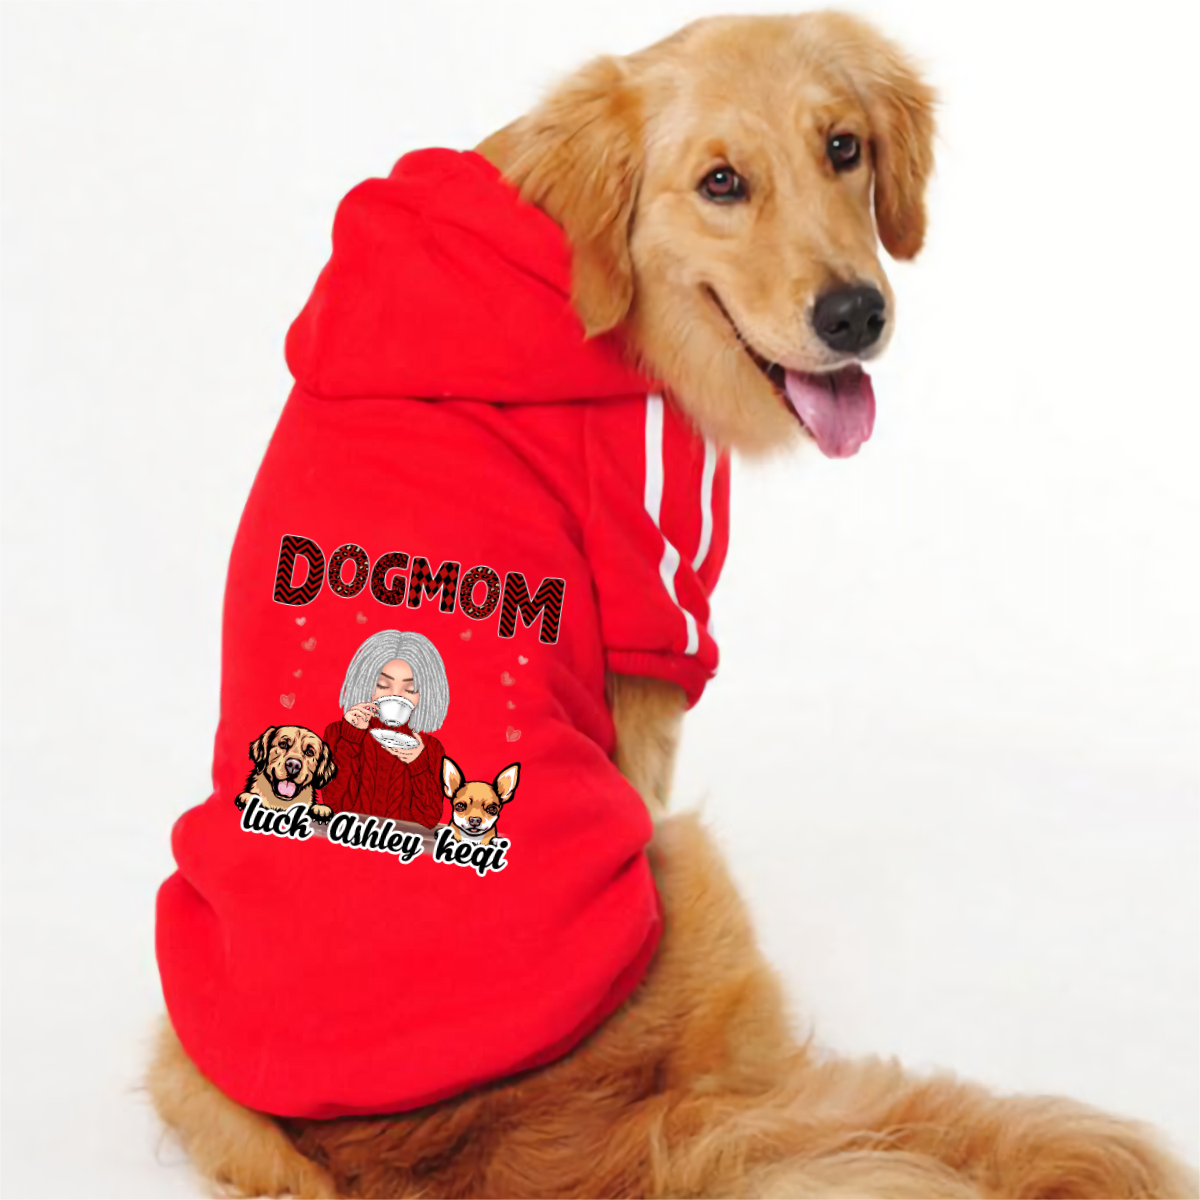 Dog Mom Red Patterned Personalized Dog Clothes